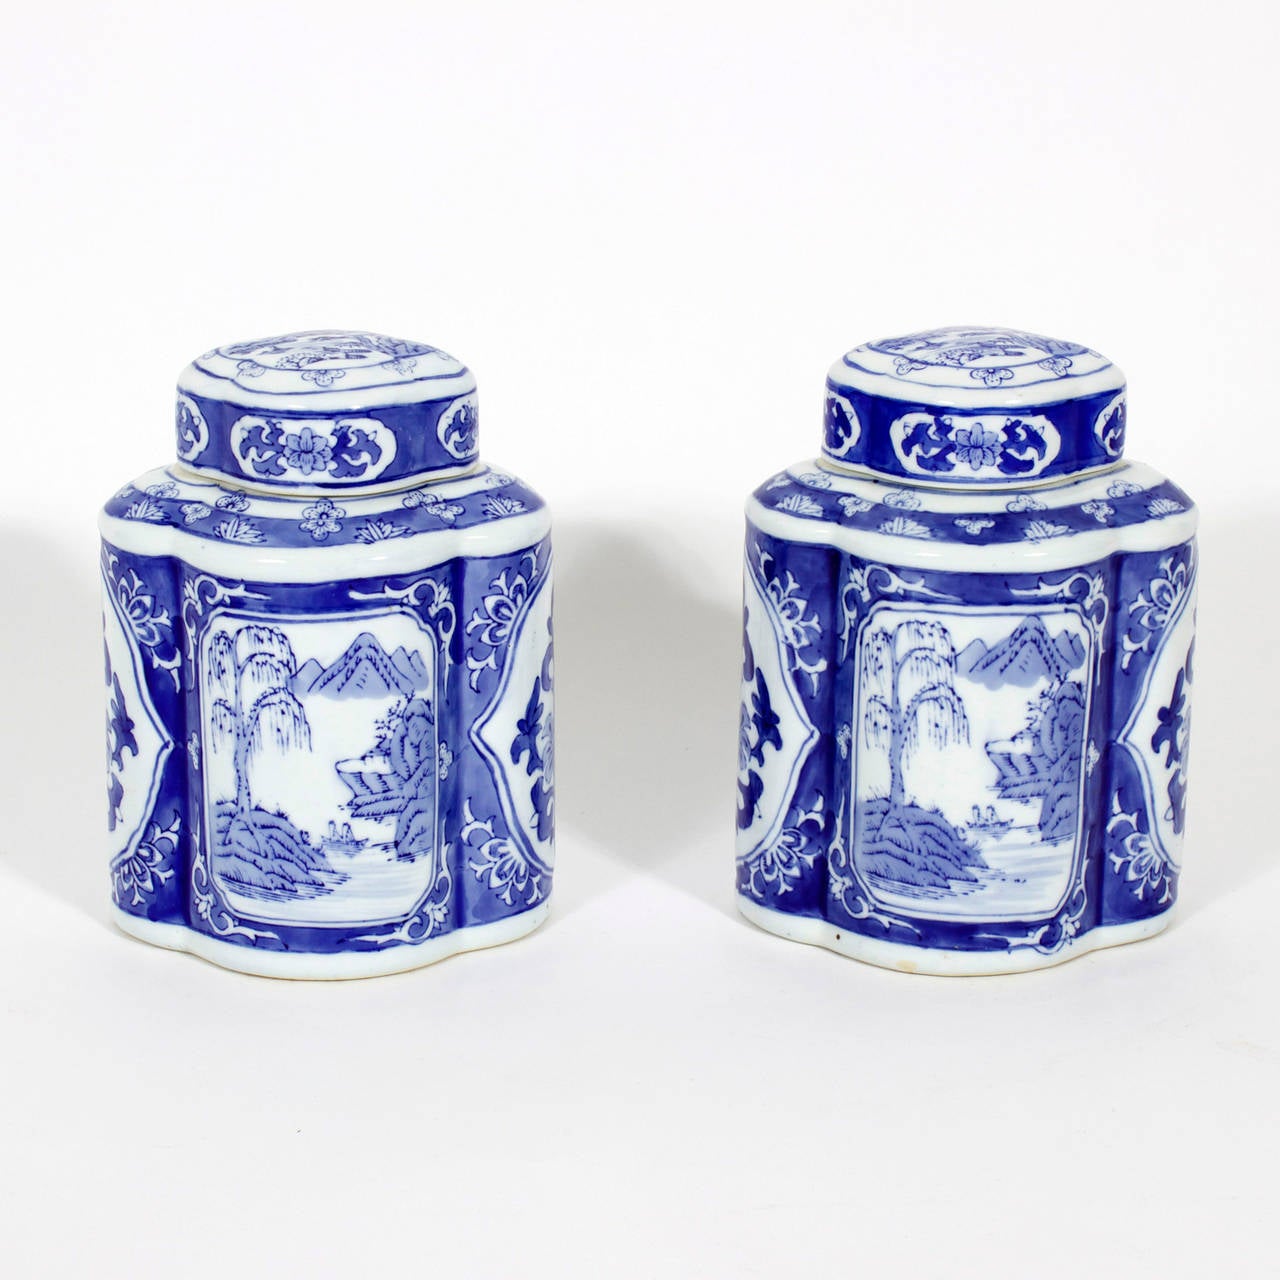 A pair of Chinese export blue and white lidded canisters with a landscape motif. Nice form and sweet size. Blue and white so versatile, for so many decors.